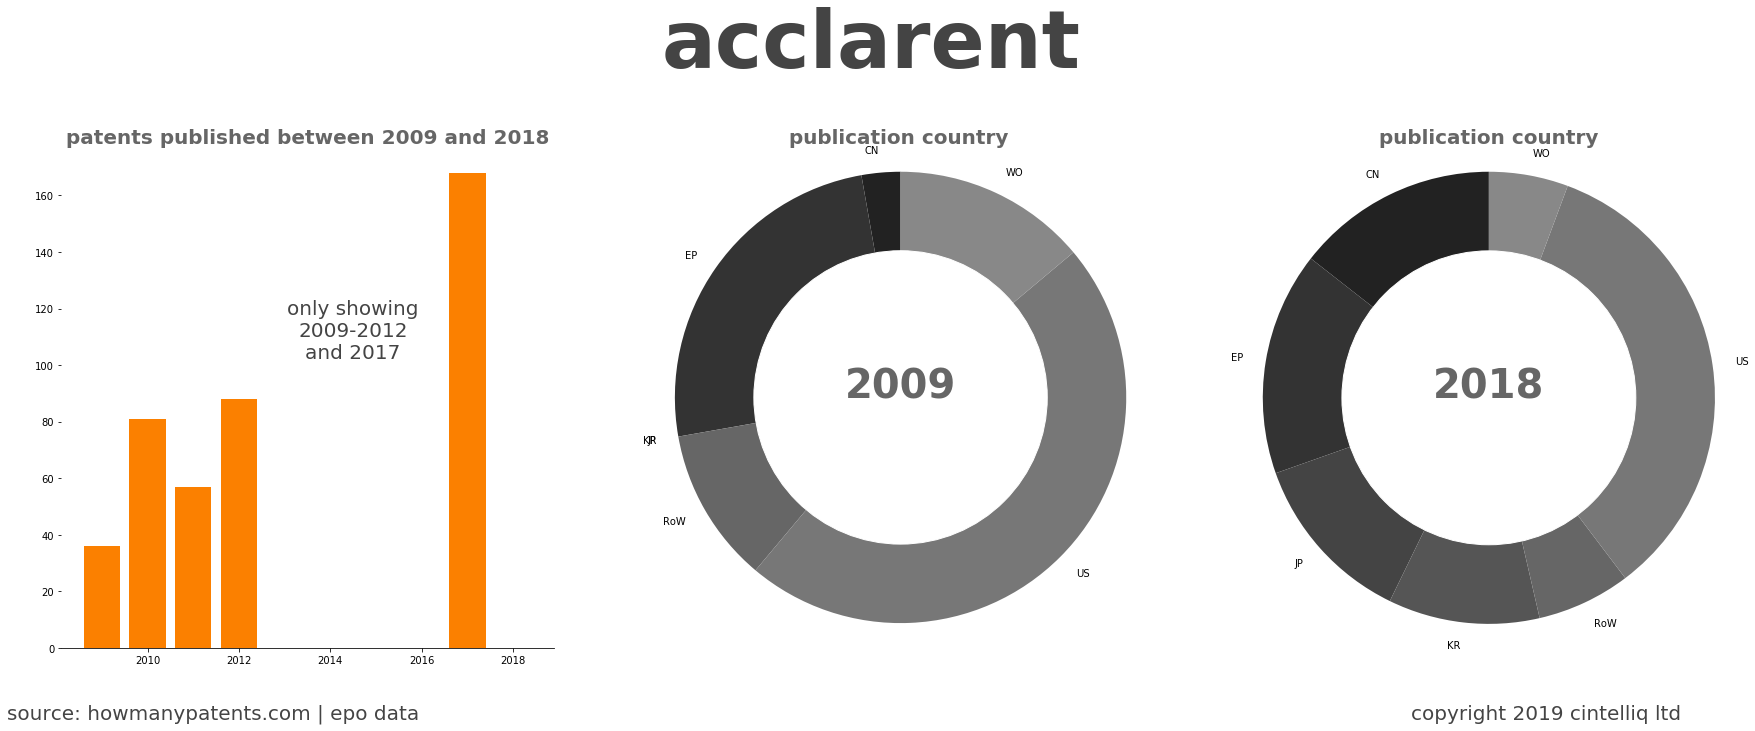 summary of patents for Acclarent